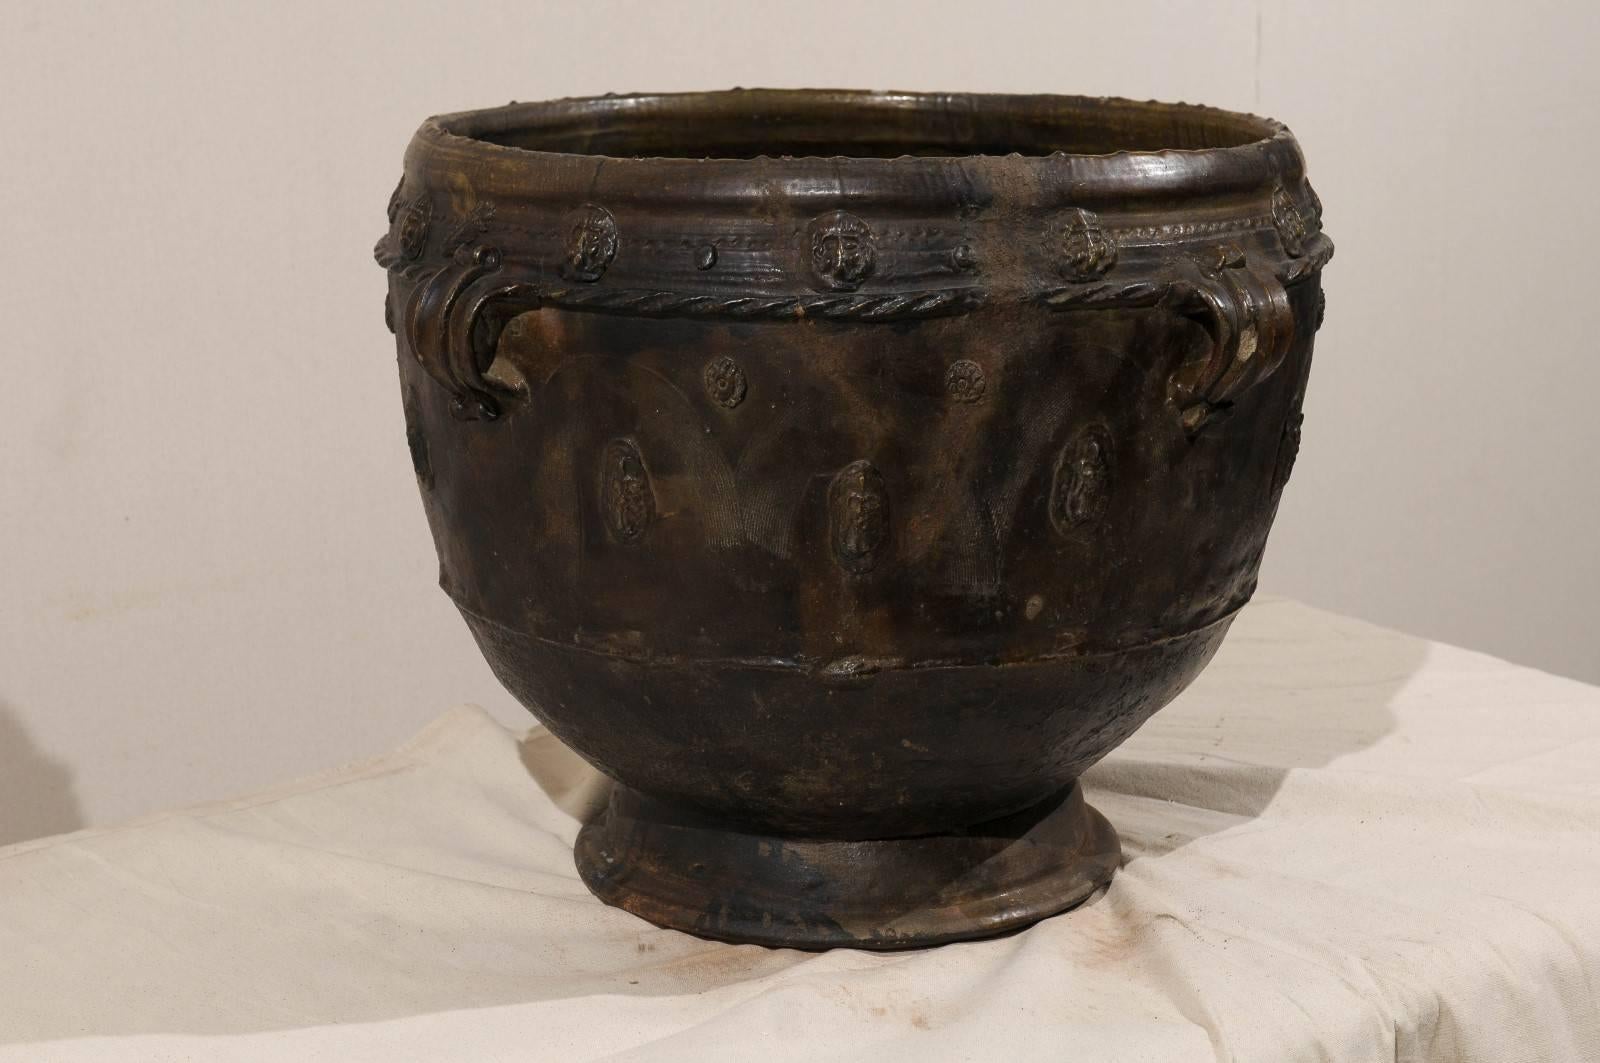 Brown-Black Colored Clay Jar with Four Handles and Decorative Motifs In Good Condition For Sale In Atlanta, GA